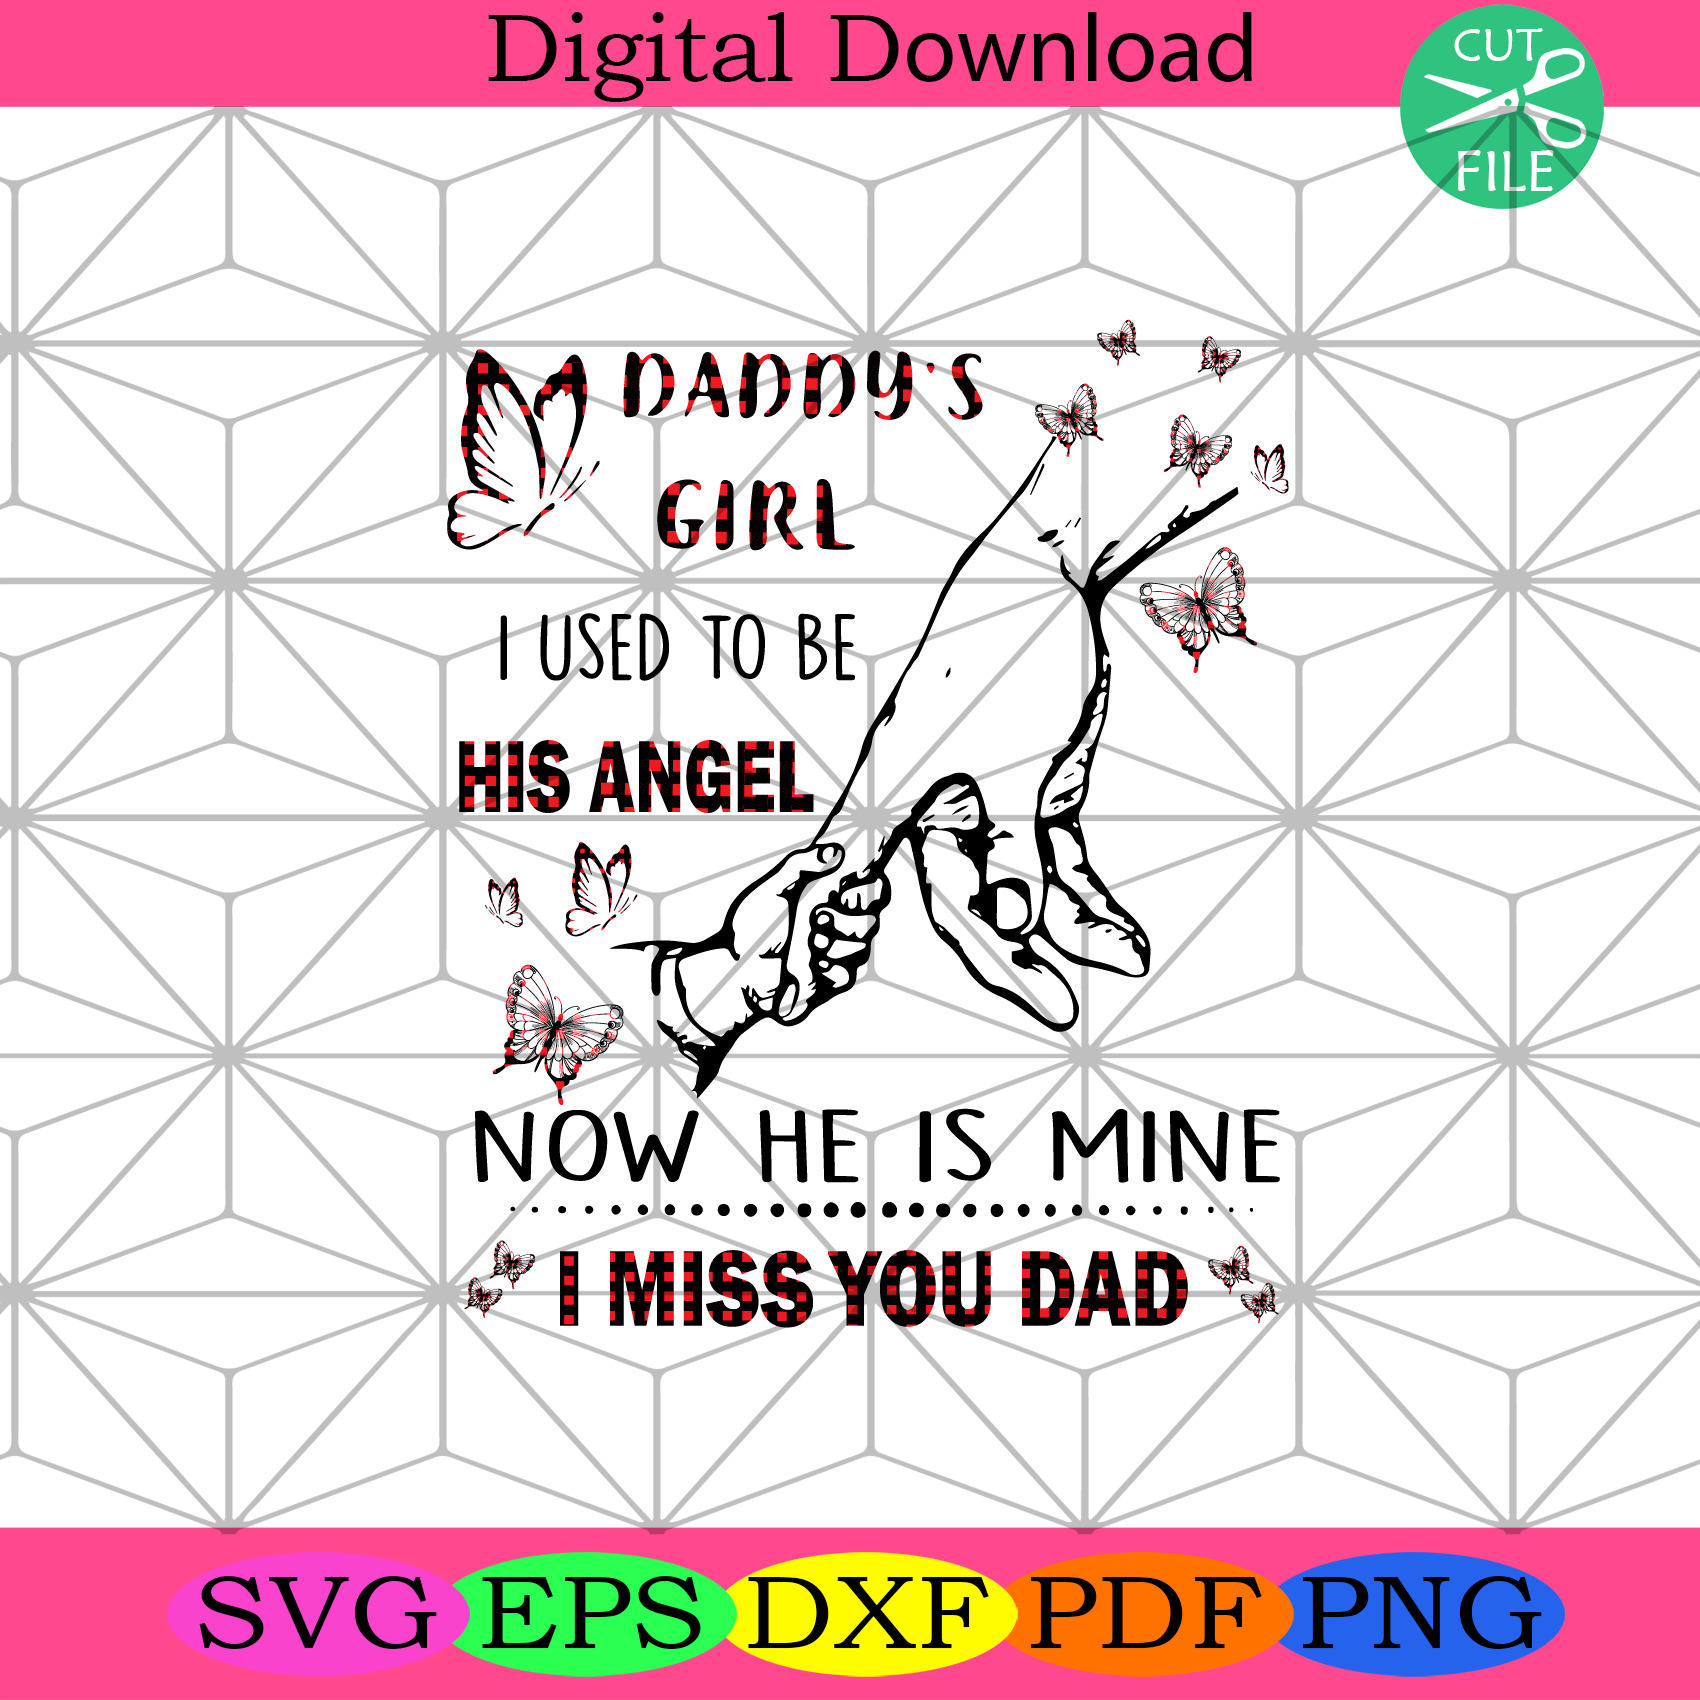 Daddys Girl I Used To Be His Angel Now He Is Mine I Miss You Dad Svg